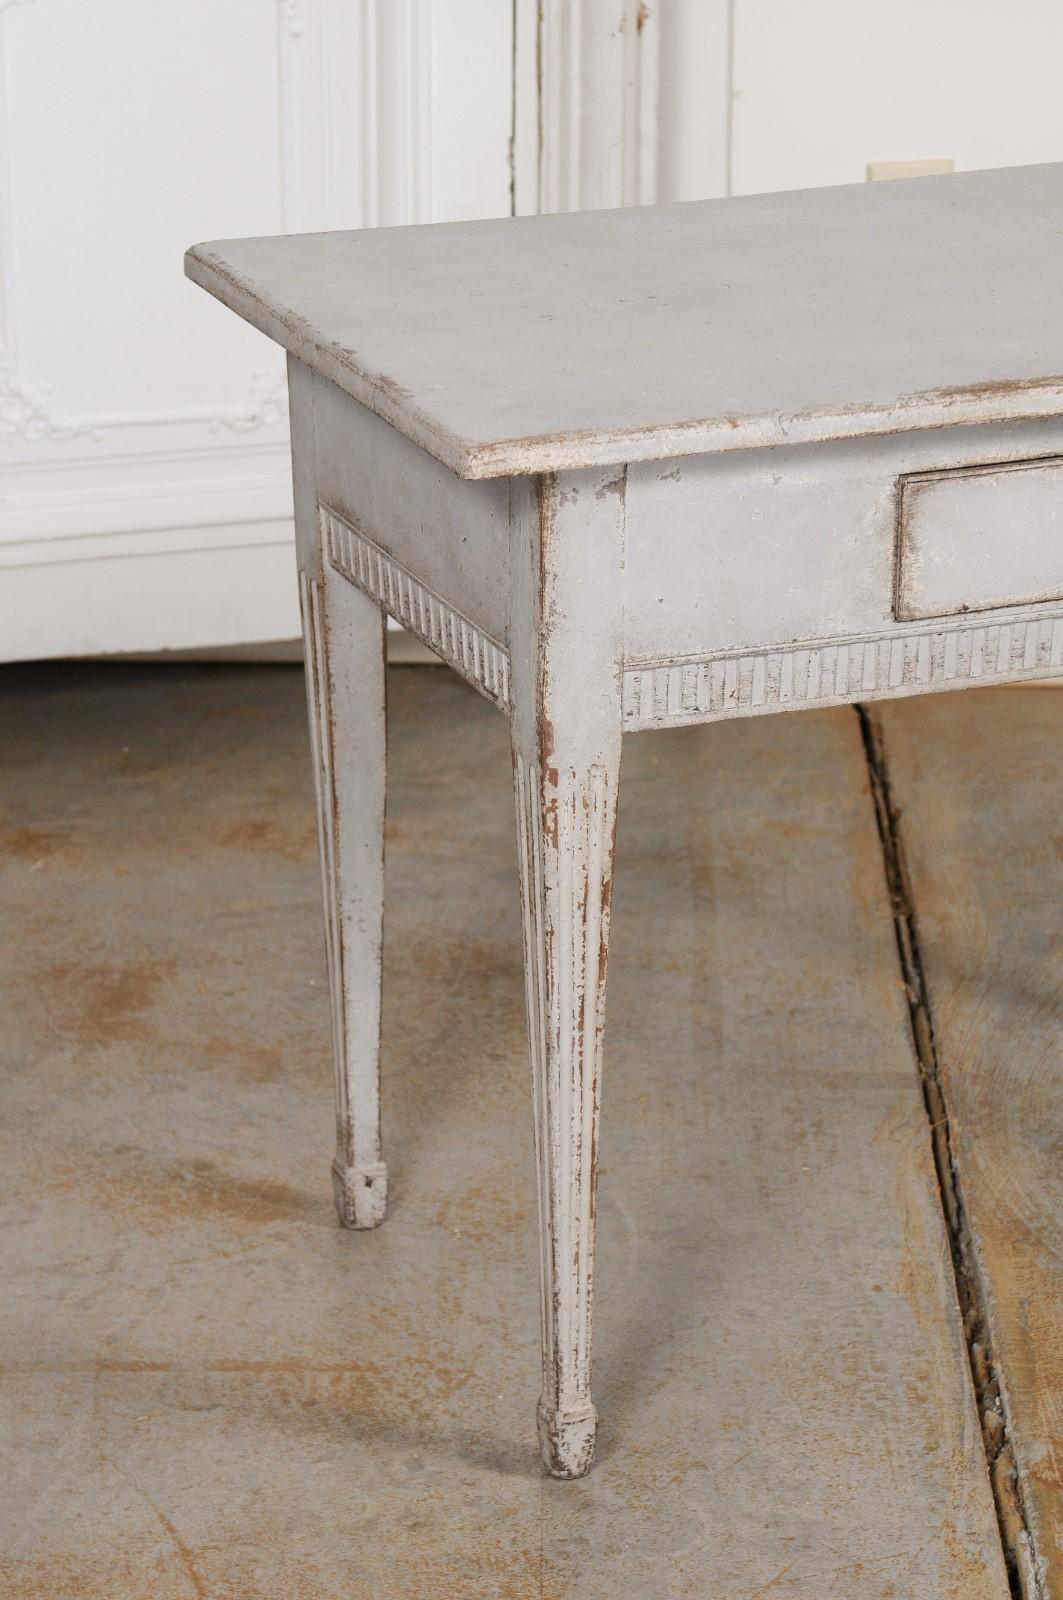 console table with storage